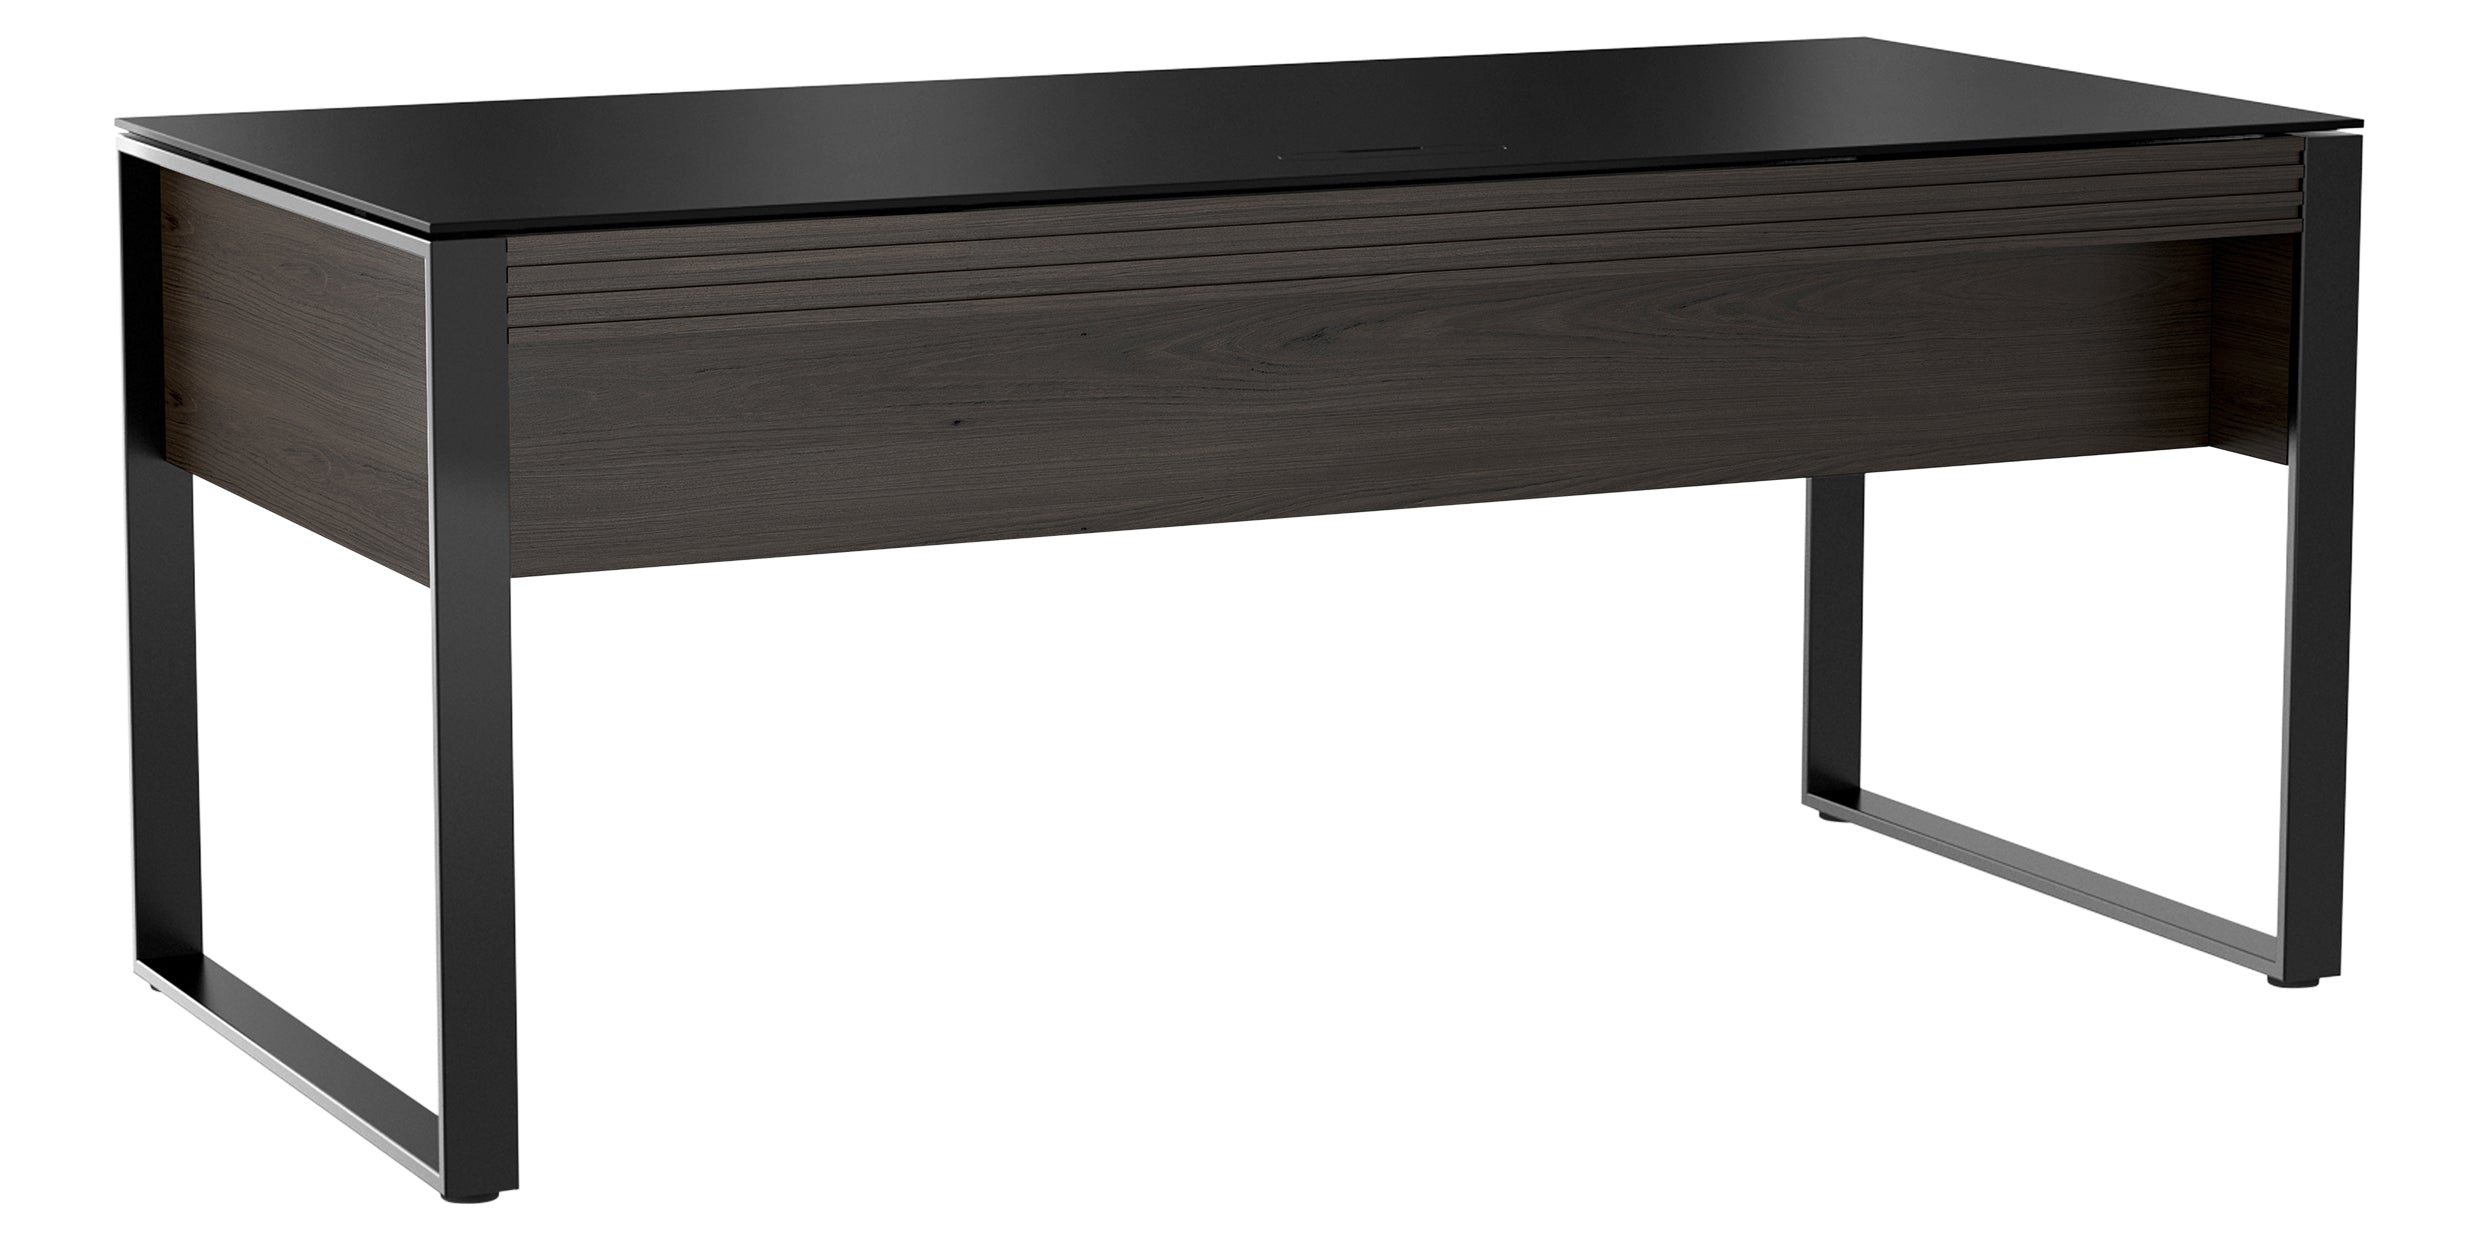 Charcoal Stained Ash & Charcoal Ash Veneer with Black Satin-Etched Glass & Black Steel | BDI Corridor Desk | Valley Ridge Furniture